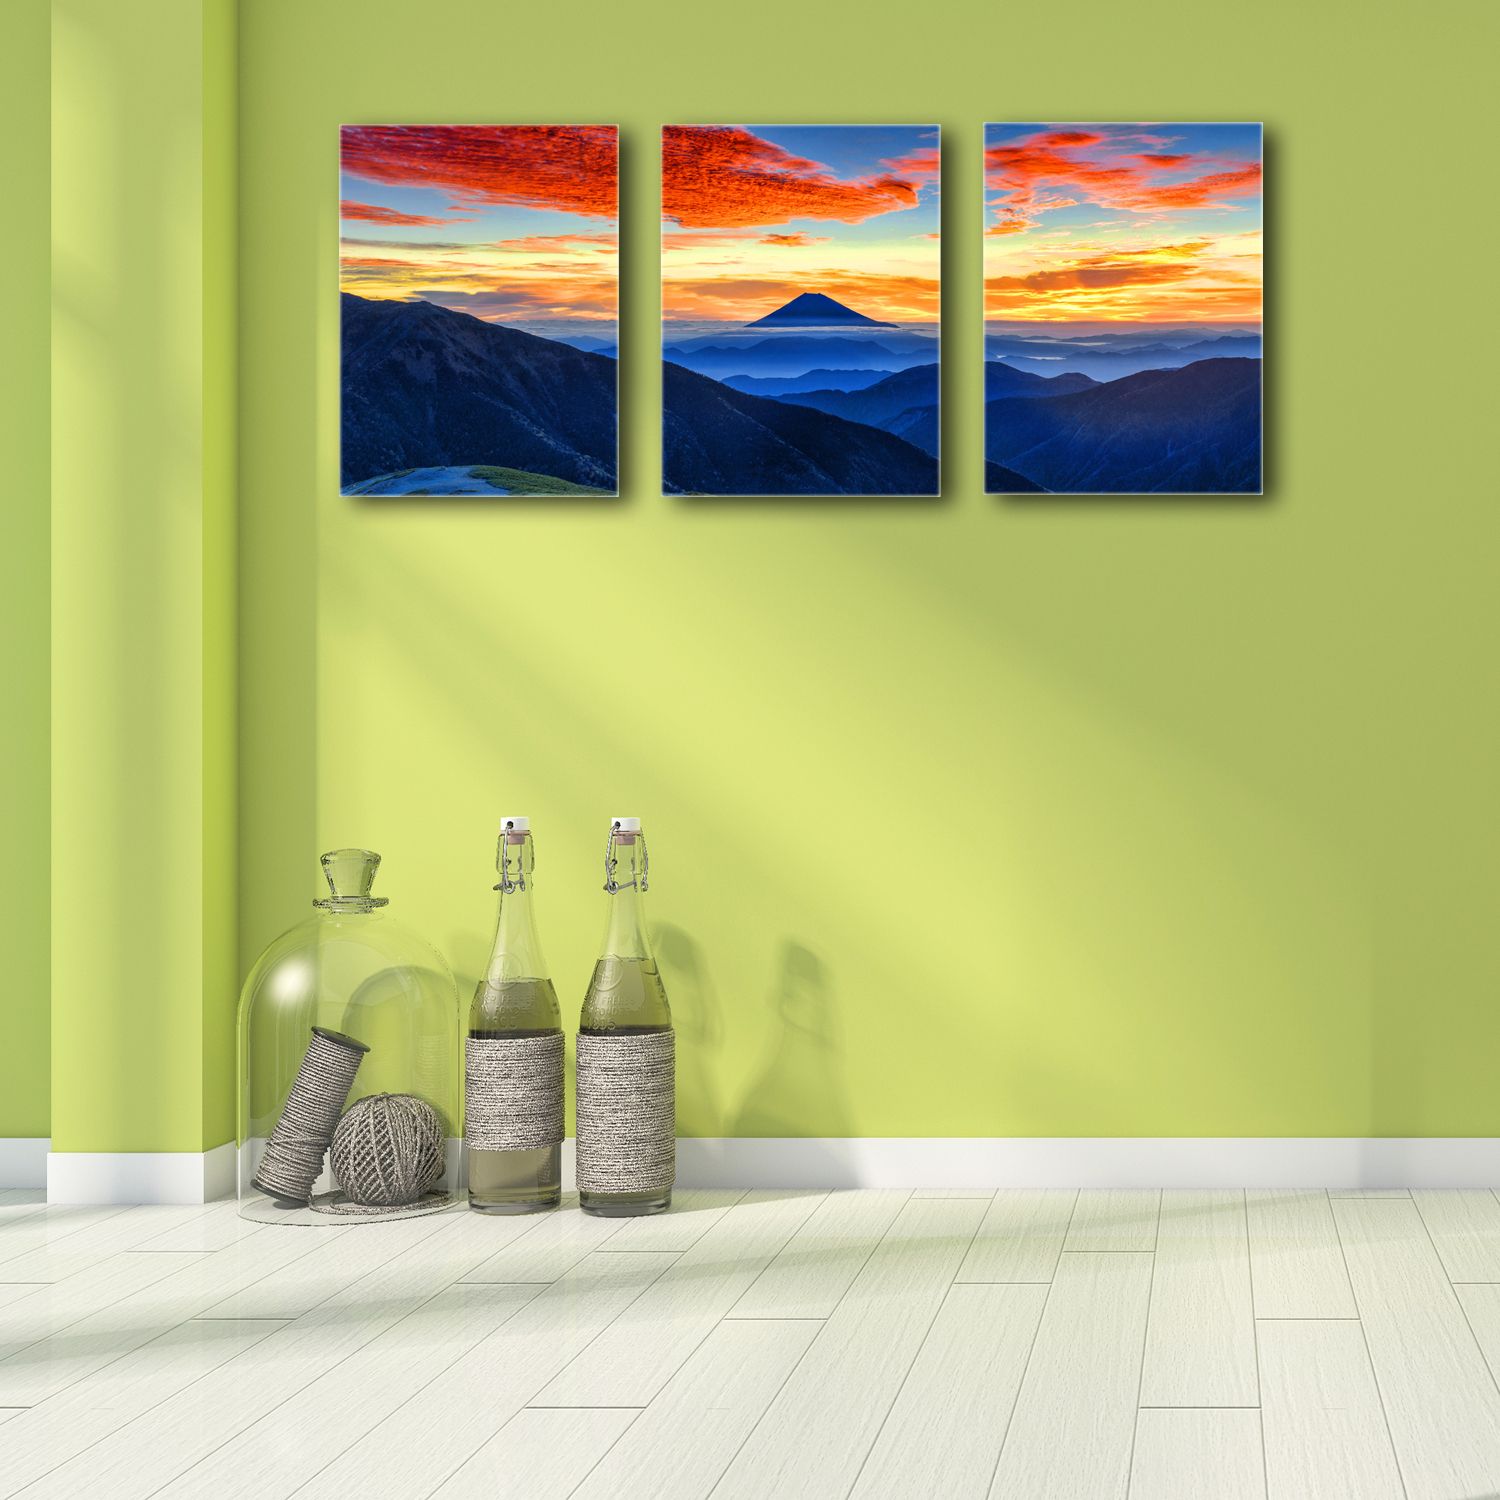 3 Panels 30x40cm Modern Home Office Wall Art Canvas For Latest Natural Framed Art Prints (View 2 of 20)